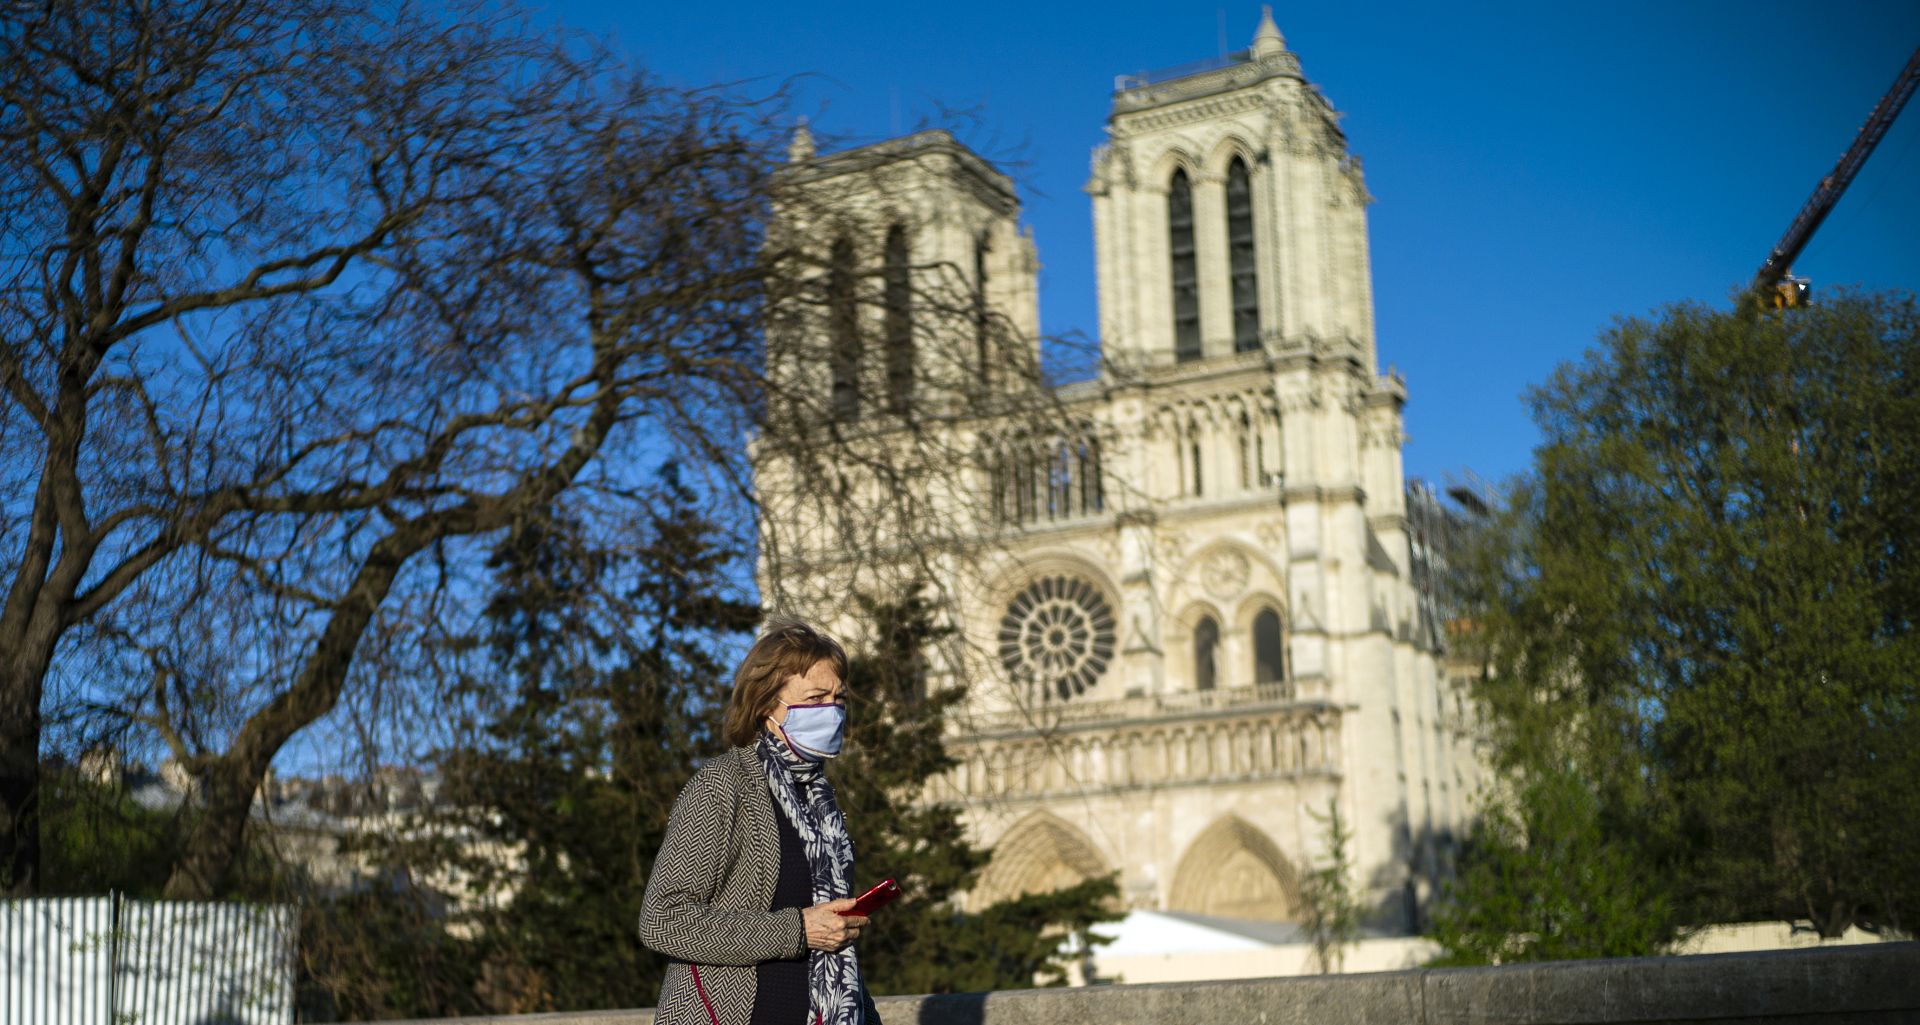 epa08365088 A woman wearing a protective face mask walks in front of the Notre-Dame cathedral on the first anniversary of the Notre-Dame fire in Paris, France, 15 April 2020. A year ago, on 15 April 2019, the 850-year-old Notre-Dame Cathedral of Paris suffered a devastating fire. Some 500 firefighters managed to prevent the entire cathedral from being reduced to ashes, although its celebrated spire has been destroyed. No major event were organized as France is under lockdown in an attempt to stop the widespread of the SARS-CoV-2 coronavirus causing the COVID-19 disease.  EPA/YOAN VALAT